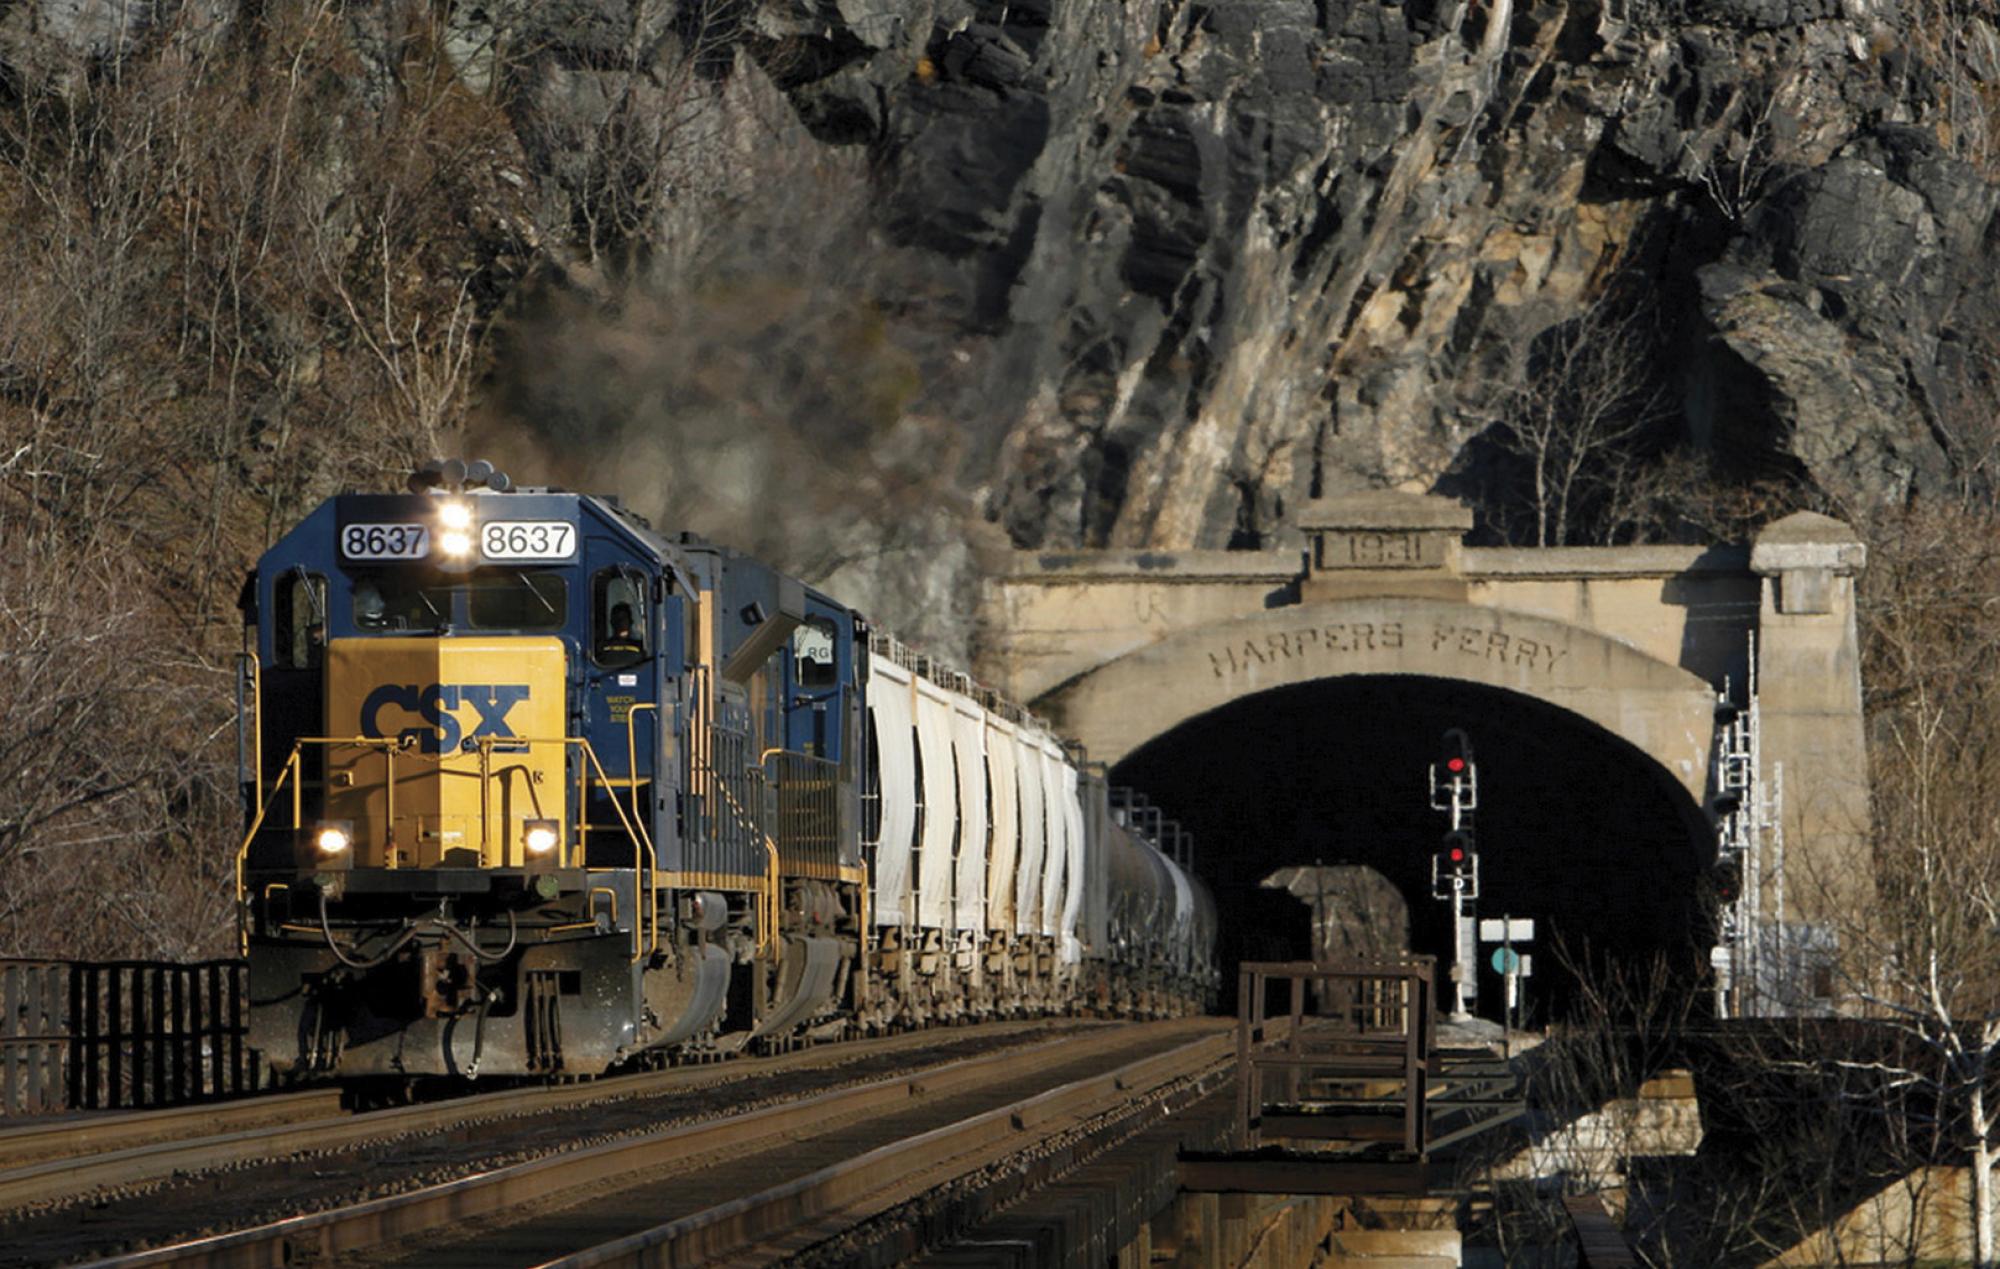 A yellow and blue CSX train on a track emerges from a tunnel that cuts through a mountain